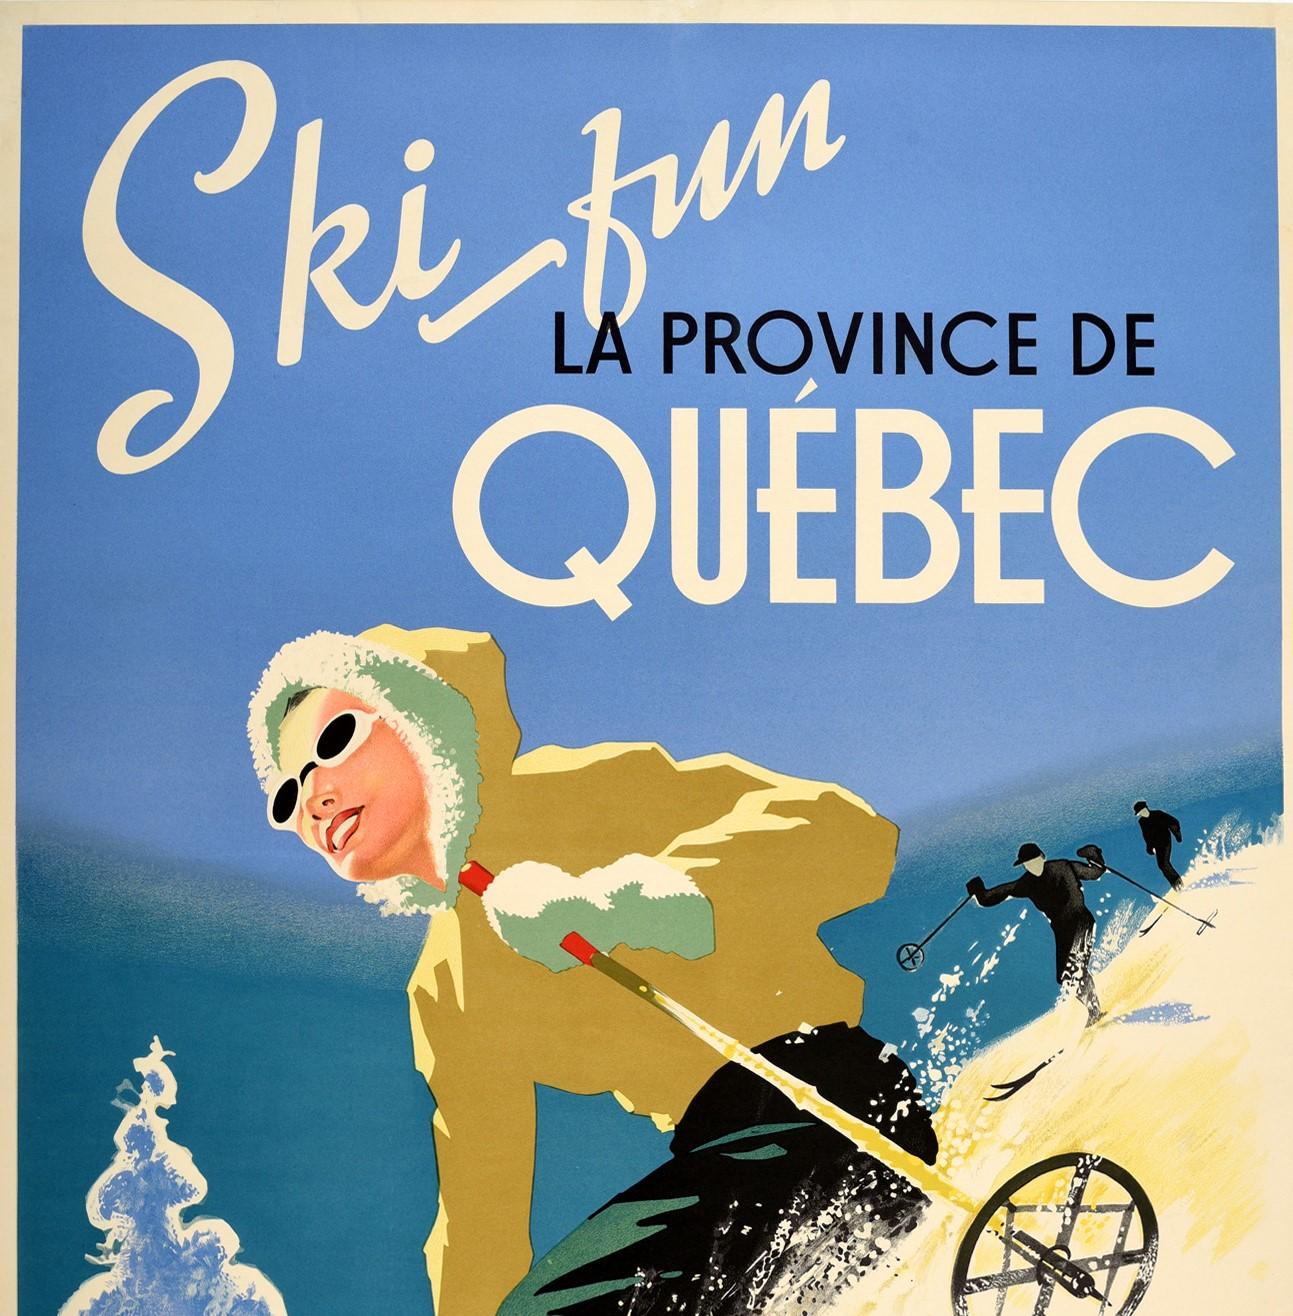 Original vintage winter travel poster - Ski fun La Province de Quebec / the Province of Quebec - featuring a stunning design depicting a smiling skier wearing fashionable ski goggles and skiing downhill at speed with the snow spraying up from her